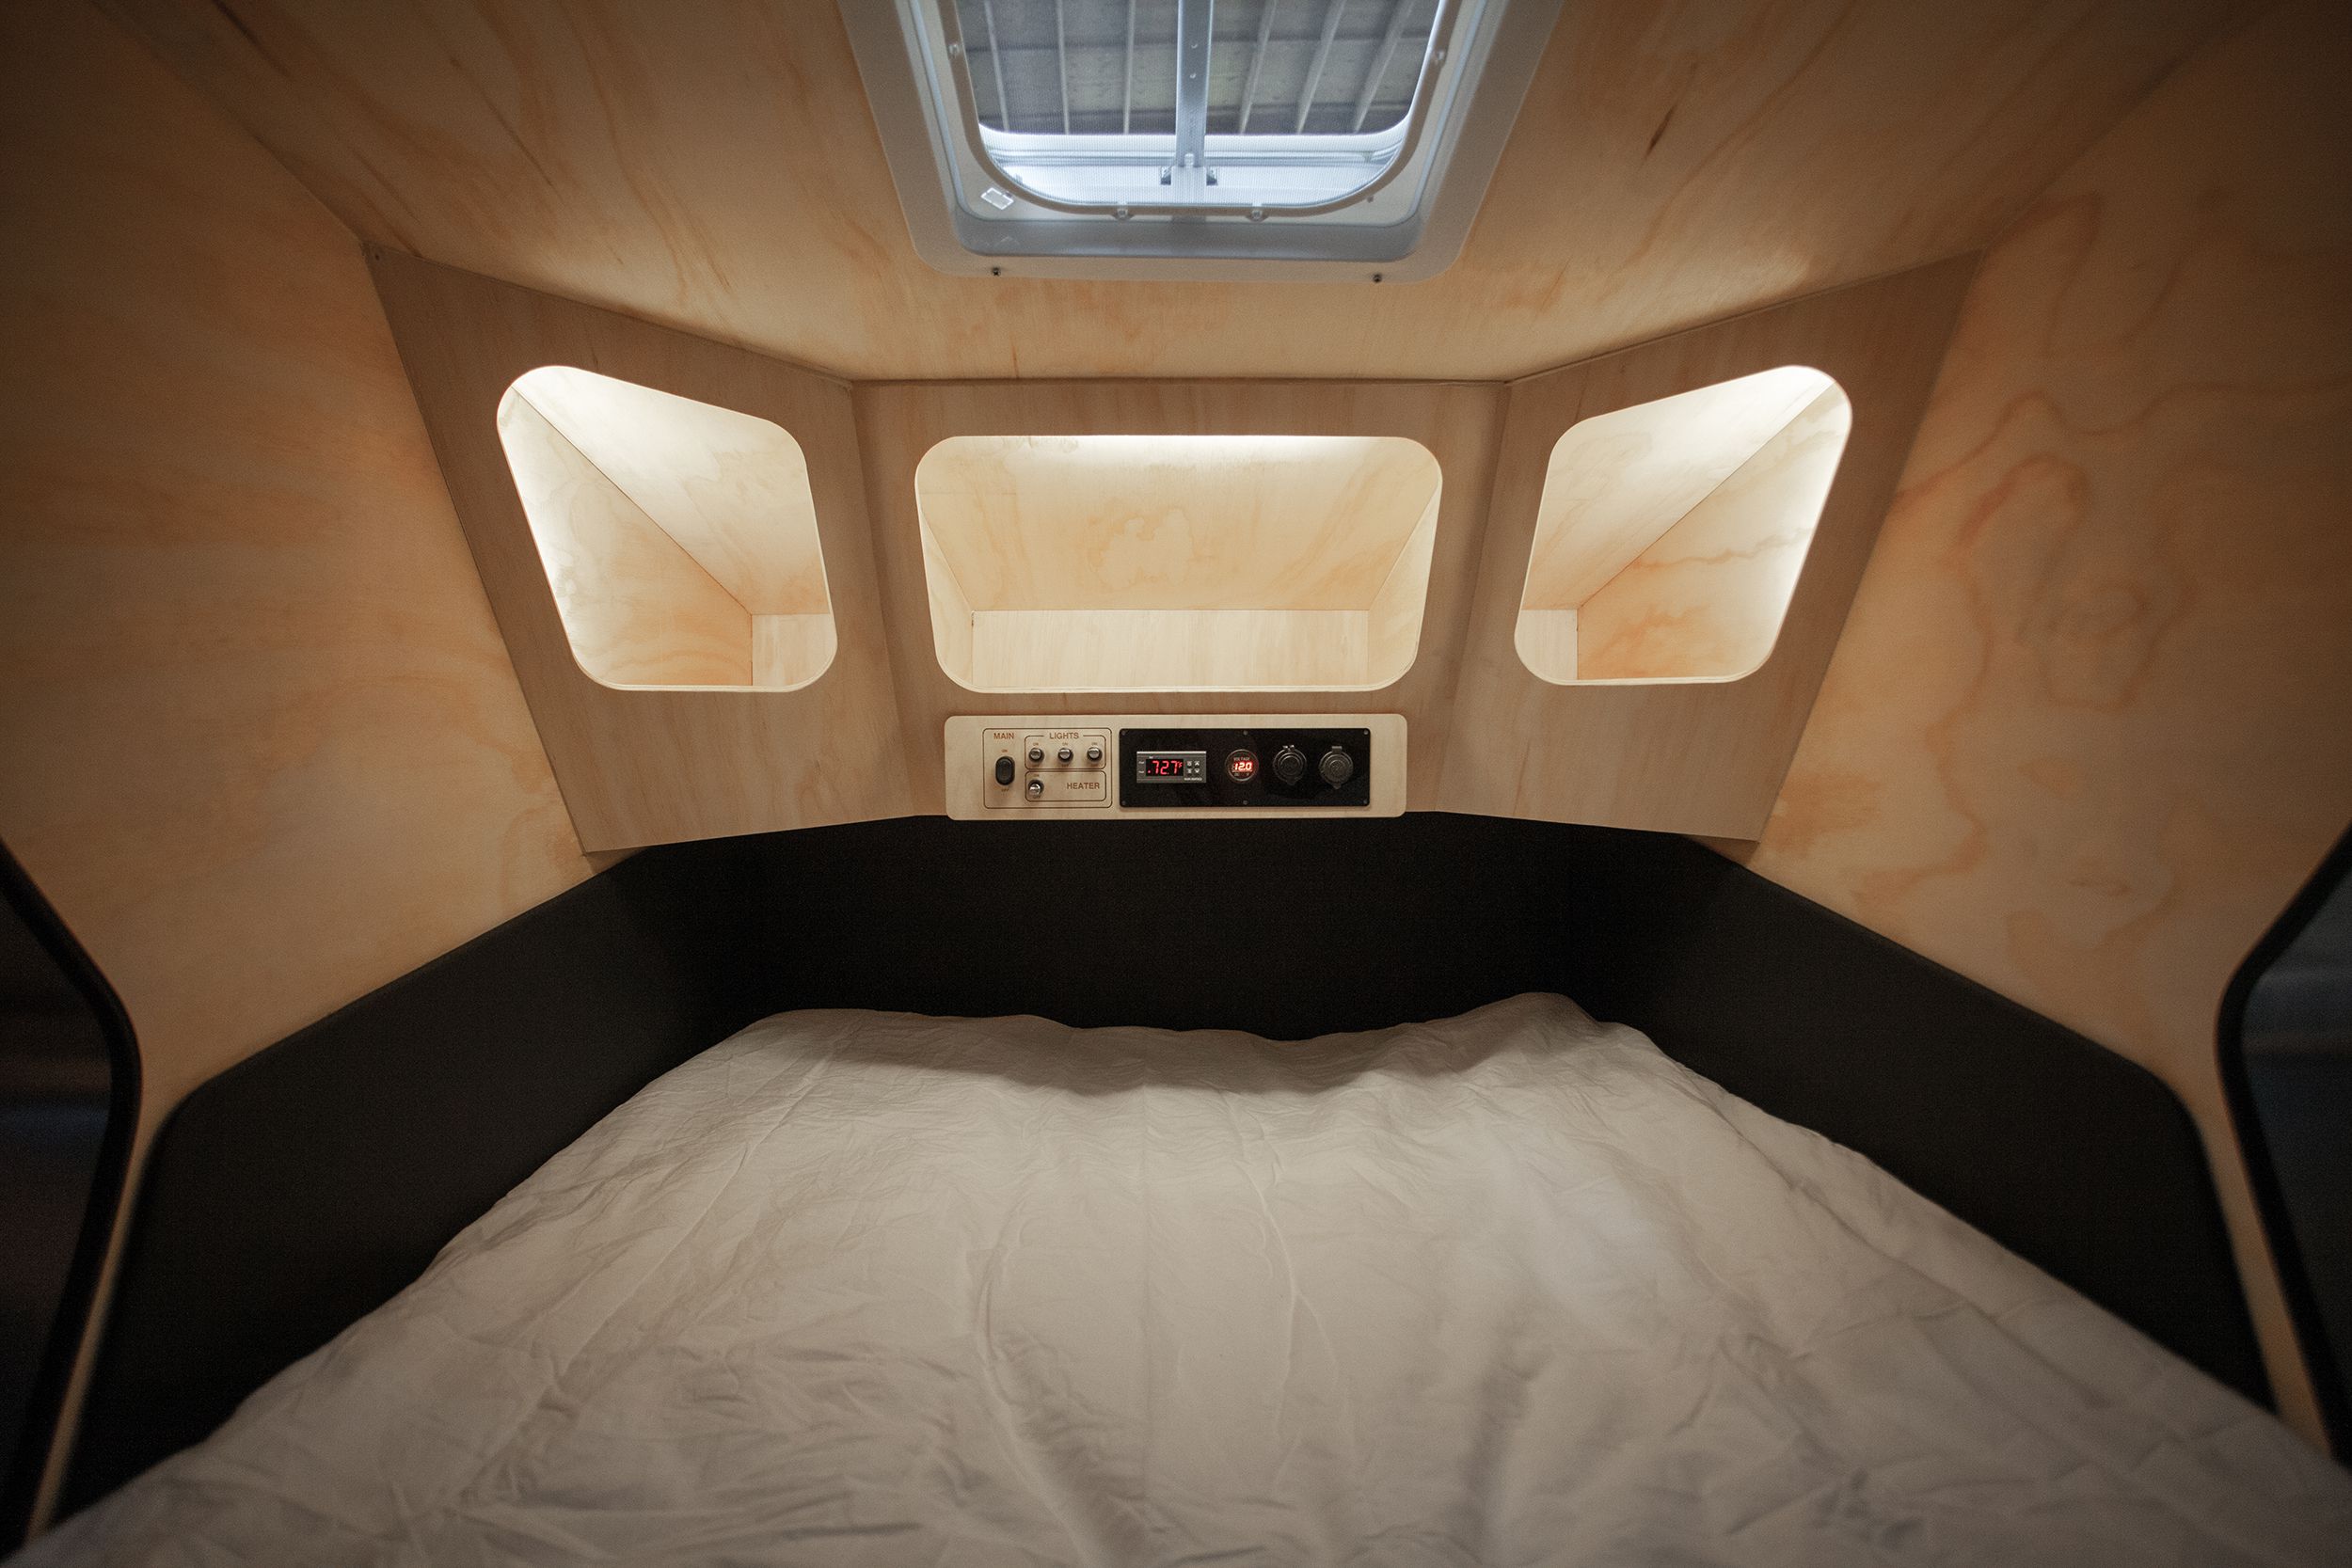 <p>Like other trailers with similar profiles, the Polydrop includes a cabin with sleeping space and storage, and the camper's back opens up to a minimalist, mod-looking cooking space that includes a cabinet for electronic components and two storage drawers — no cooktop, sink, or refrigeration here. Polydrops start at $12,500.</p>